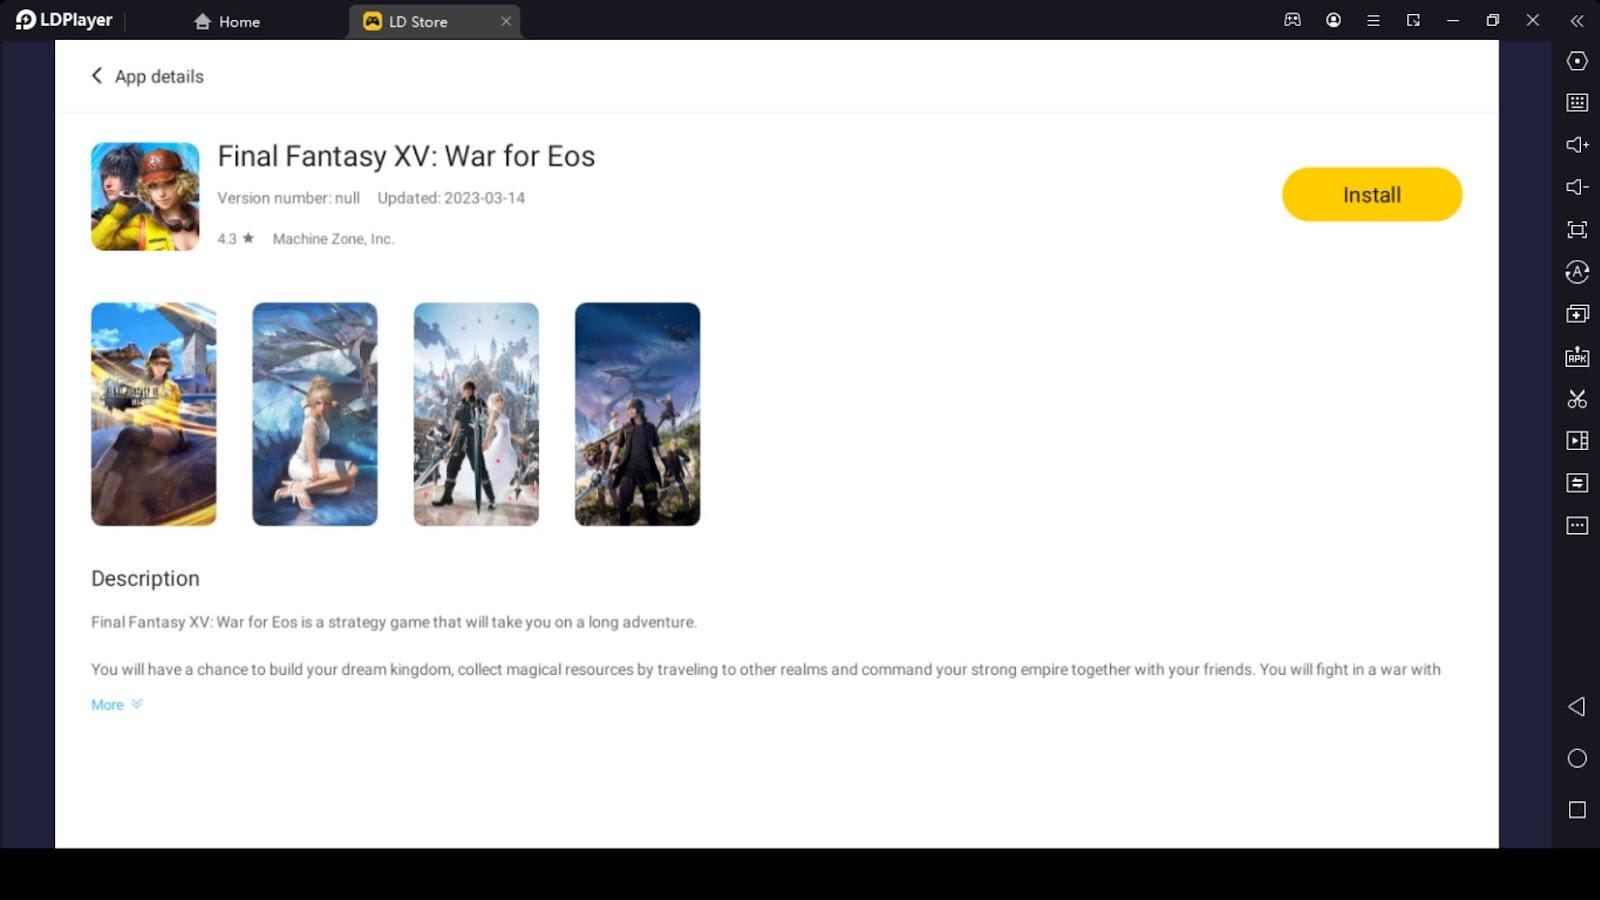 How to Play Fantasy XV: War for Eos on PC